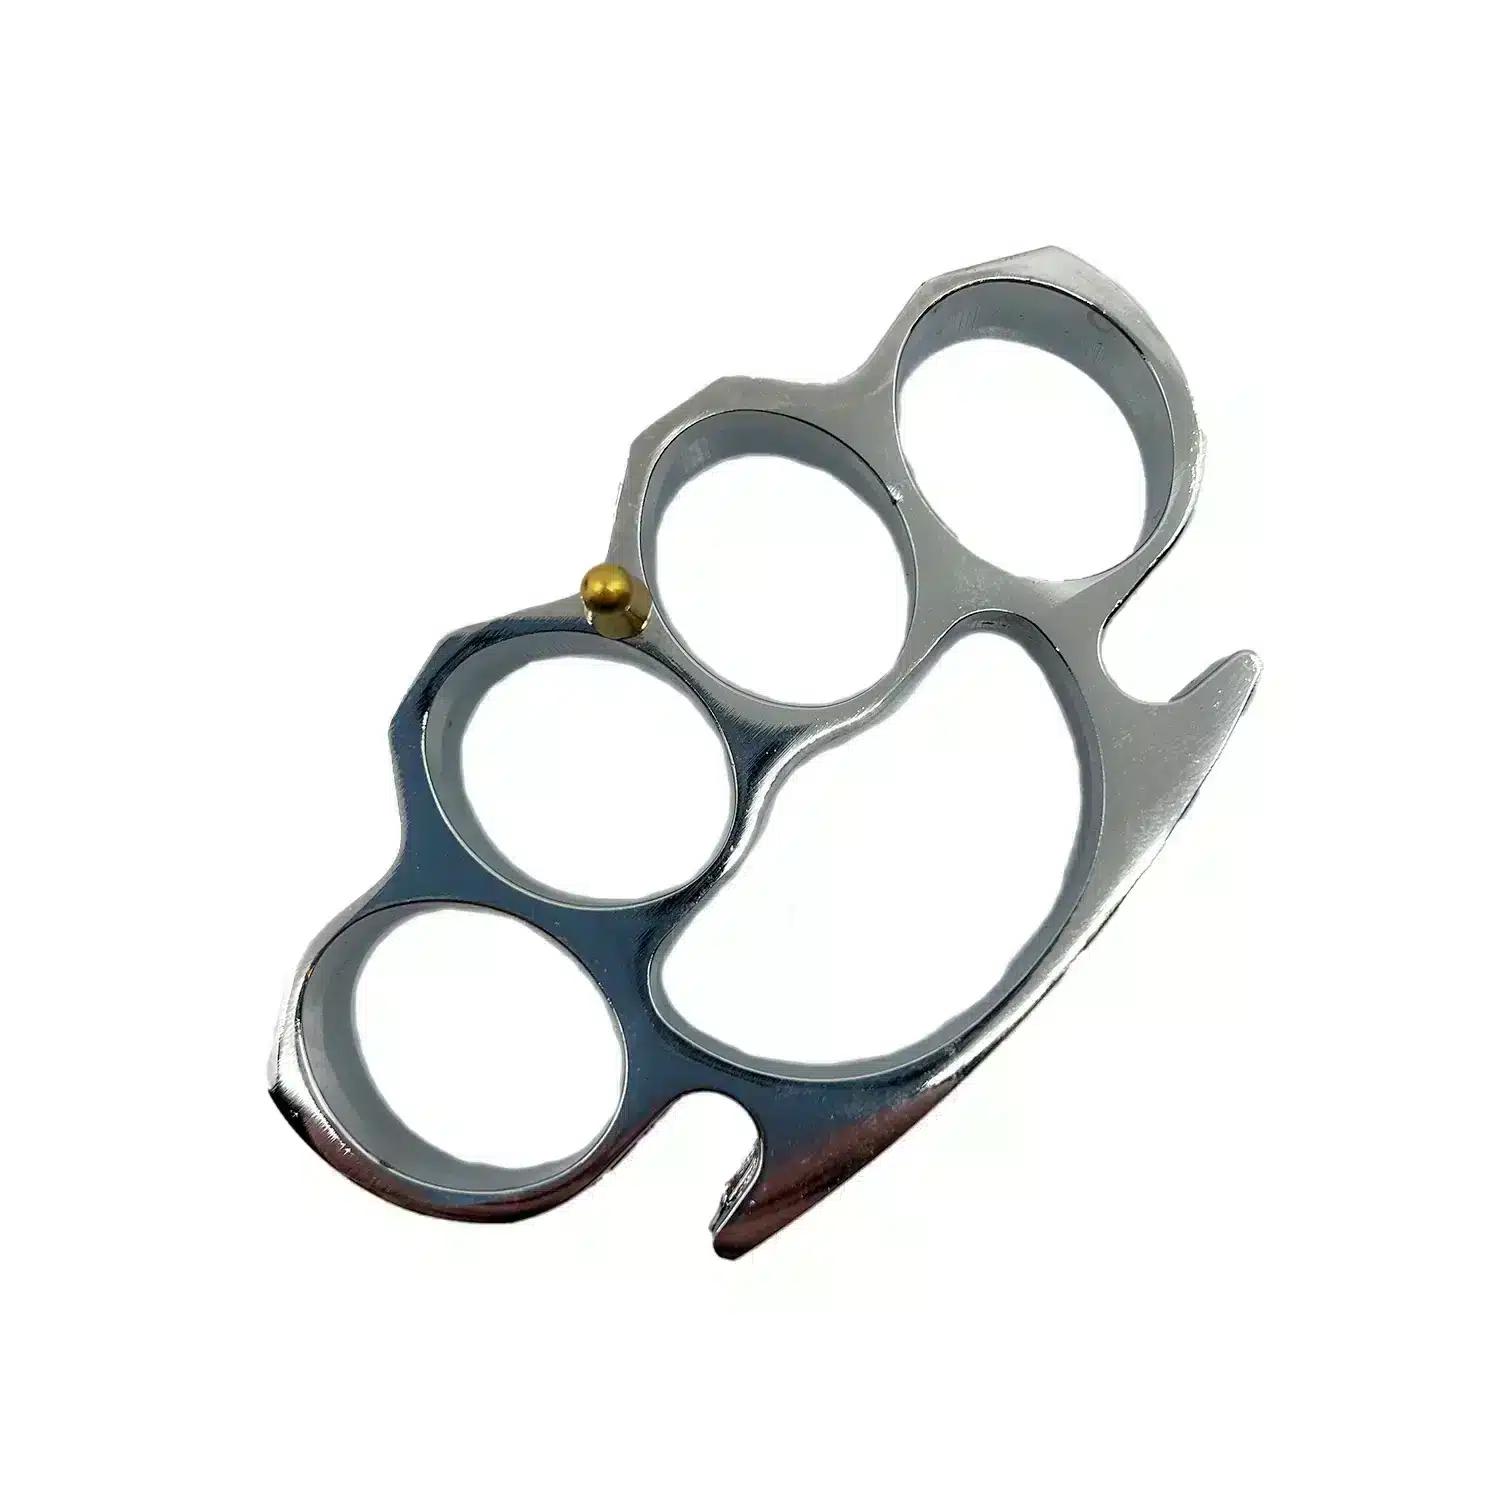 Brass Knuckle Ring  Heavy Metal Knuckle Duster Punch